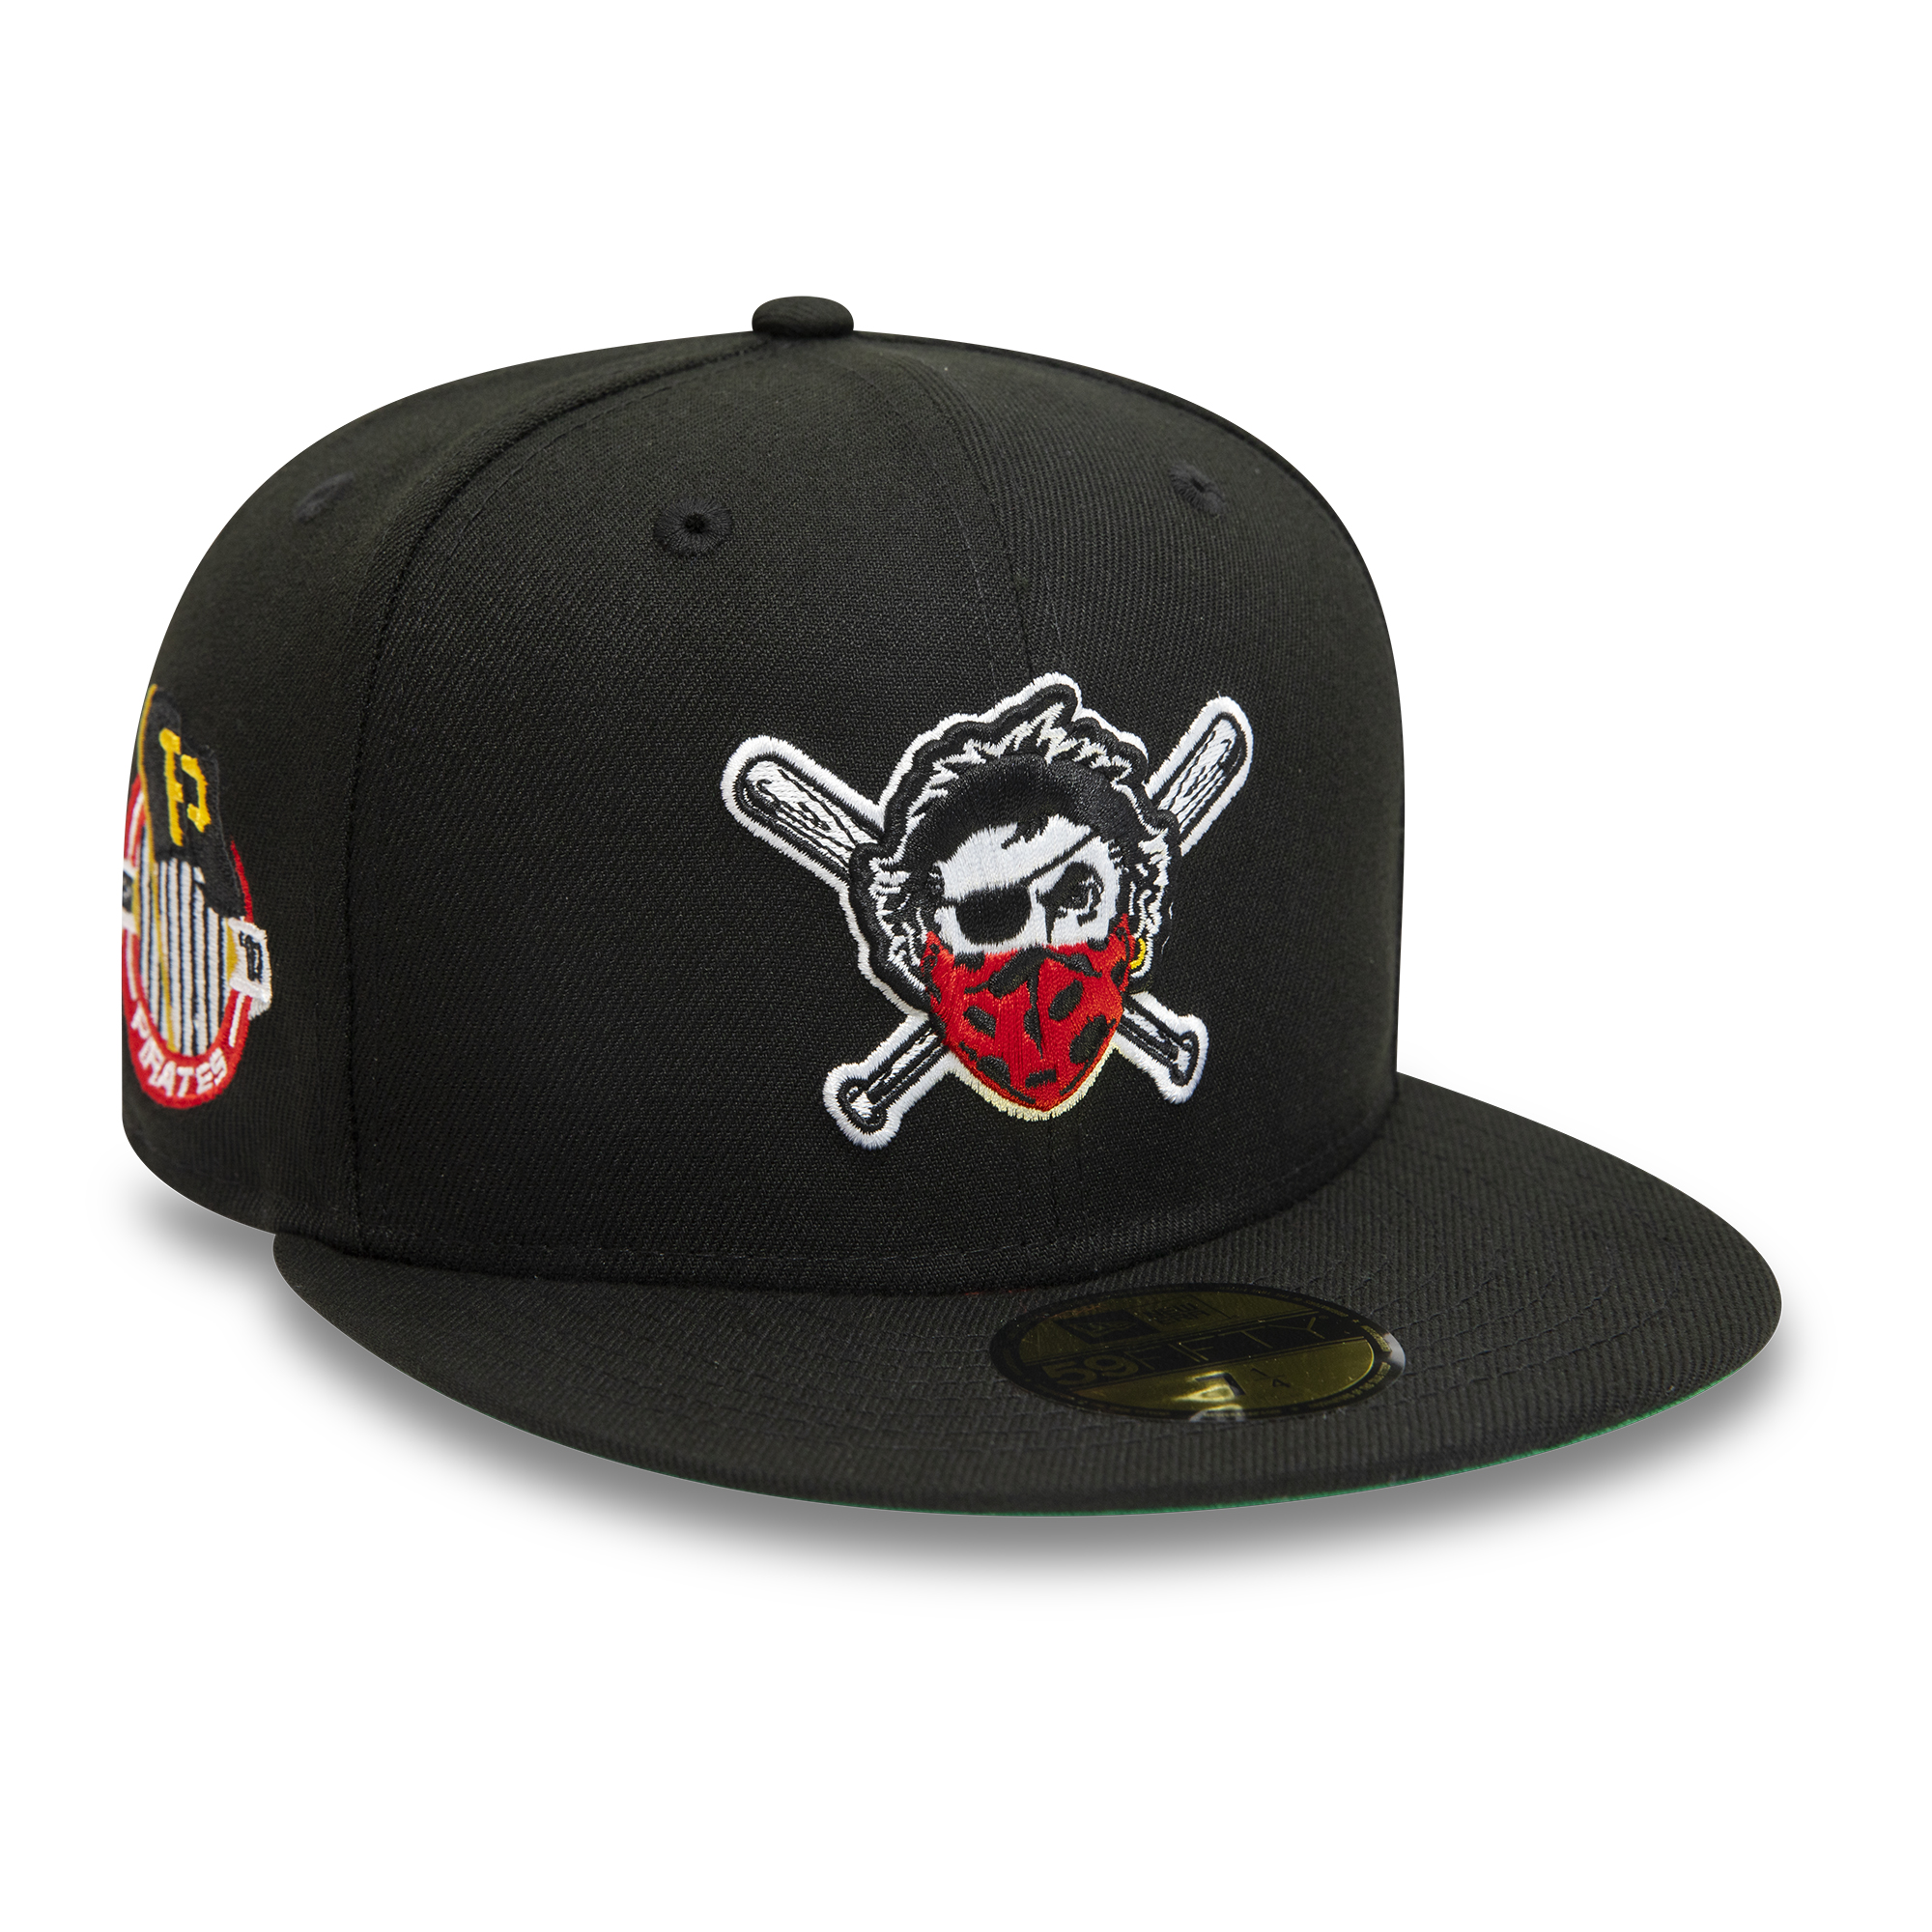 Official New Era Pittsburgh Pirates MLB Black 59FIFTY Fitted Cap B8121 ...